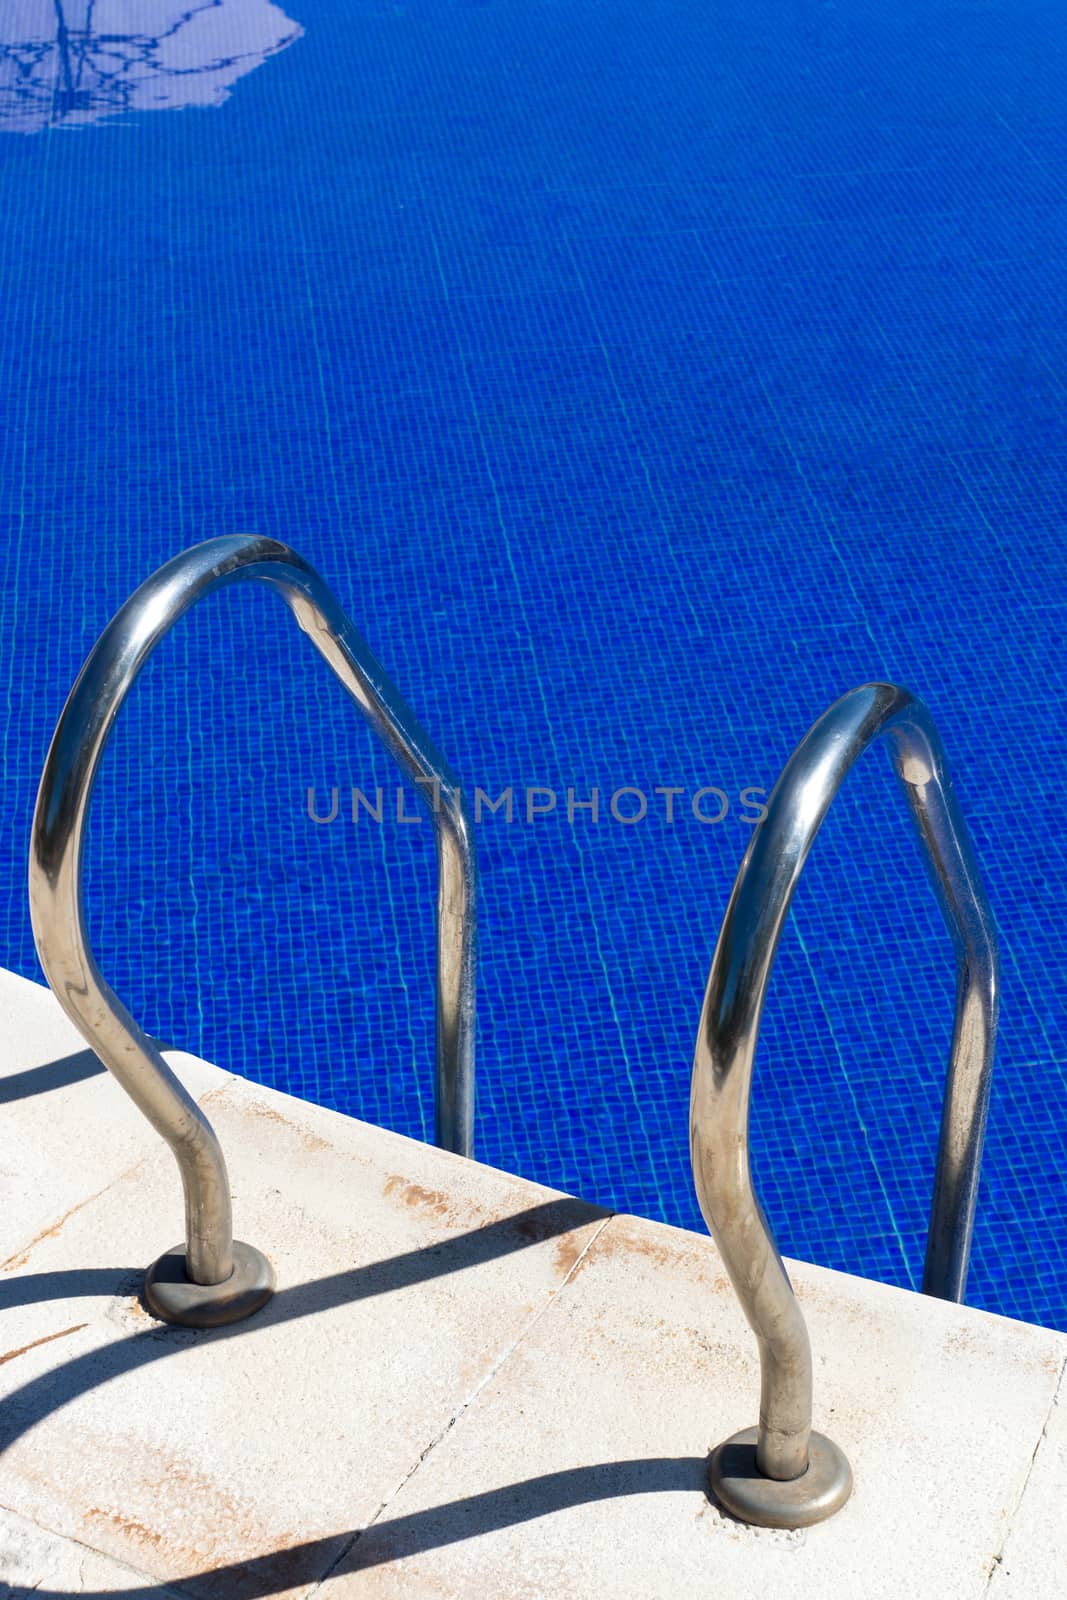 Access to a beautiful swimming pool with clear blue water